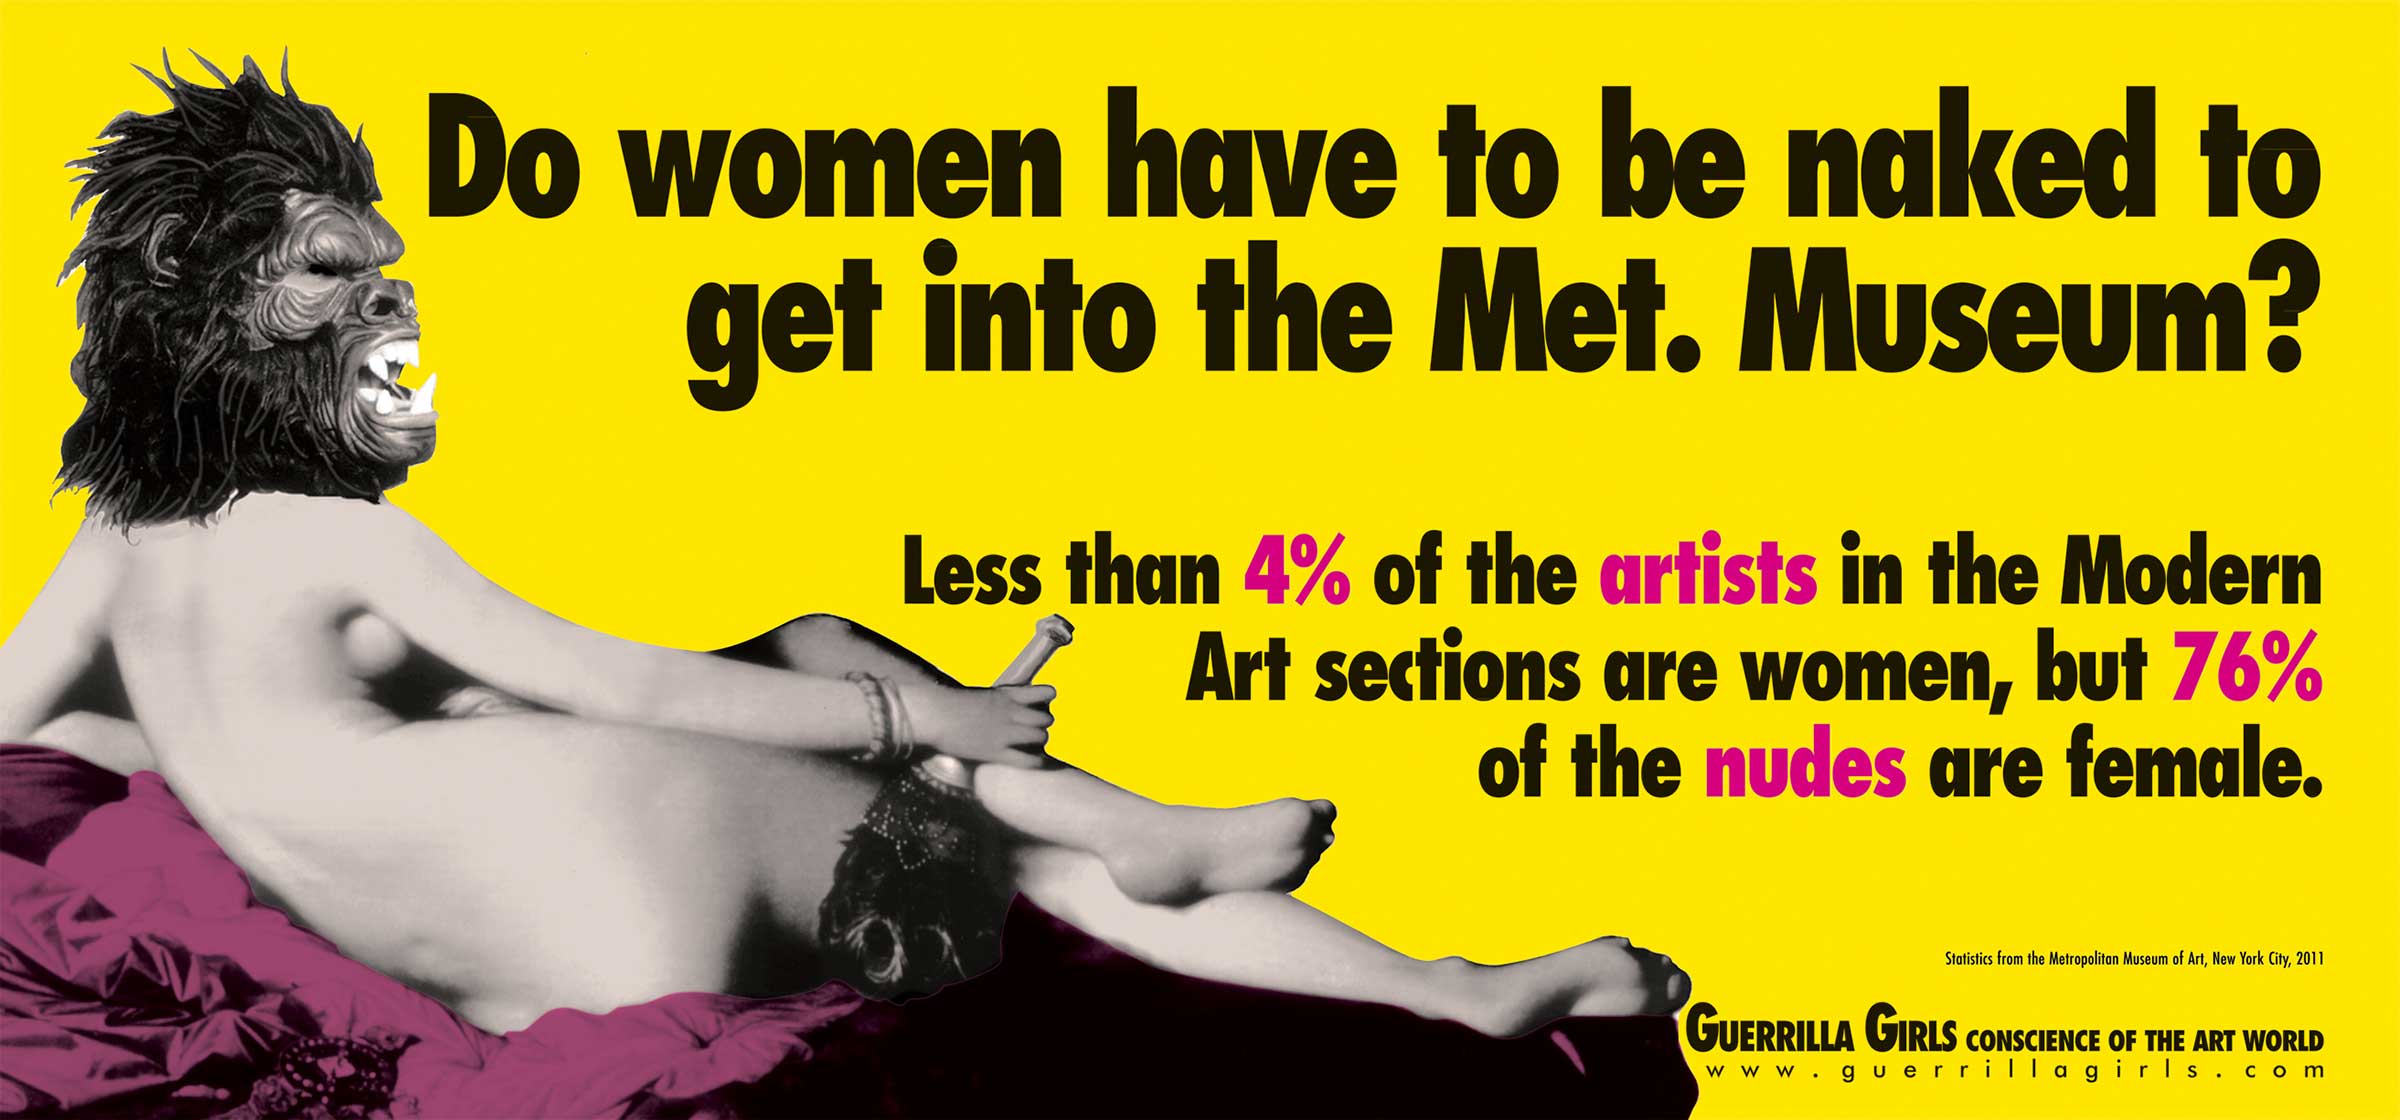 the-guerrilla-girls-do-women-have-to-be-naked-to-get-into-the-met-museum-2012